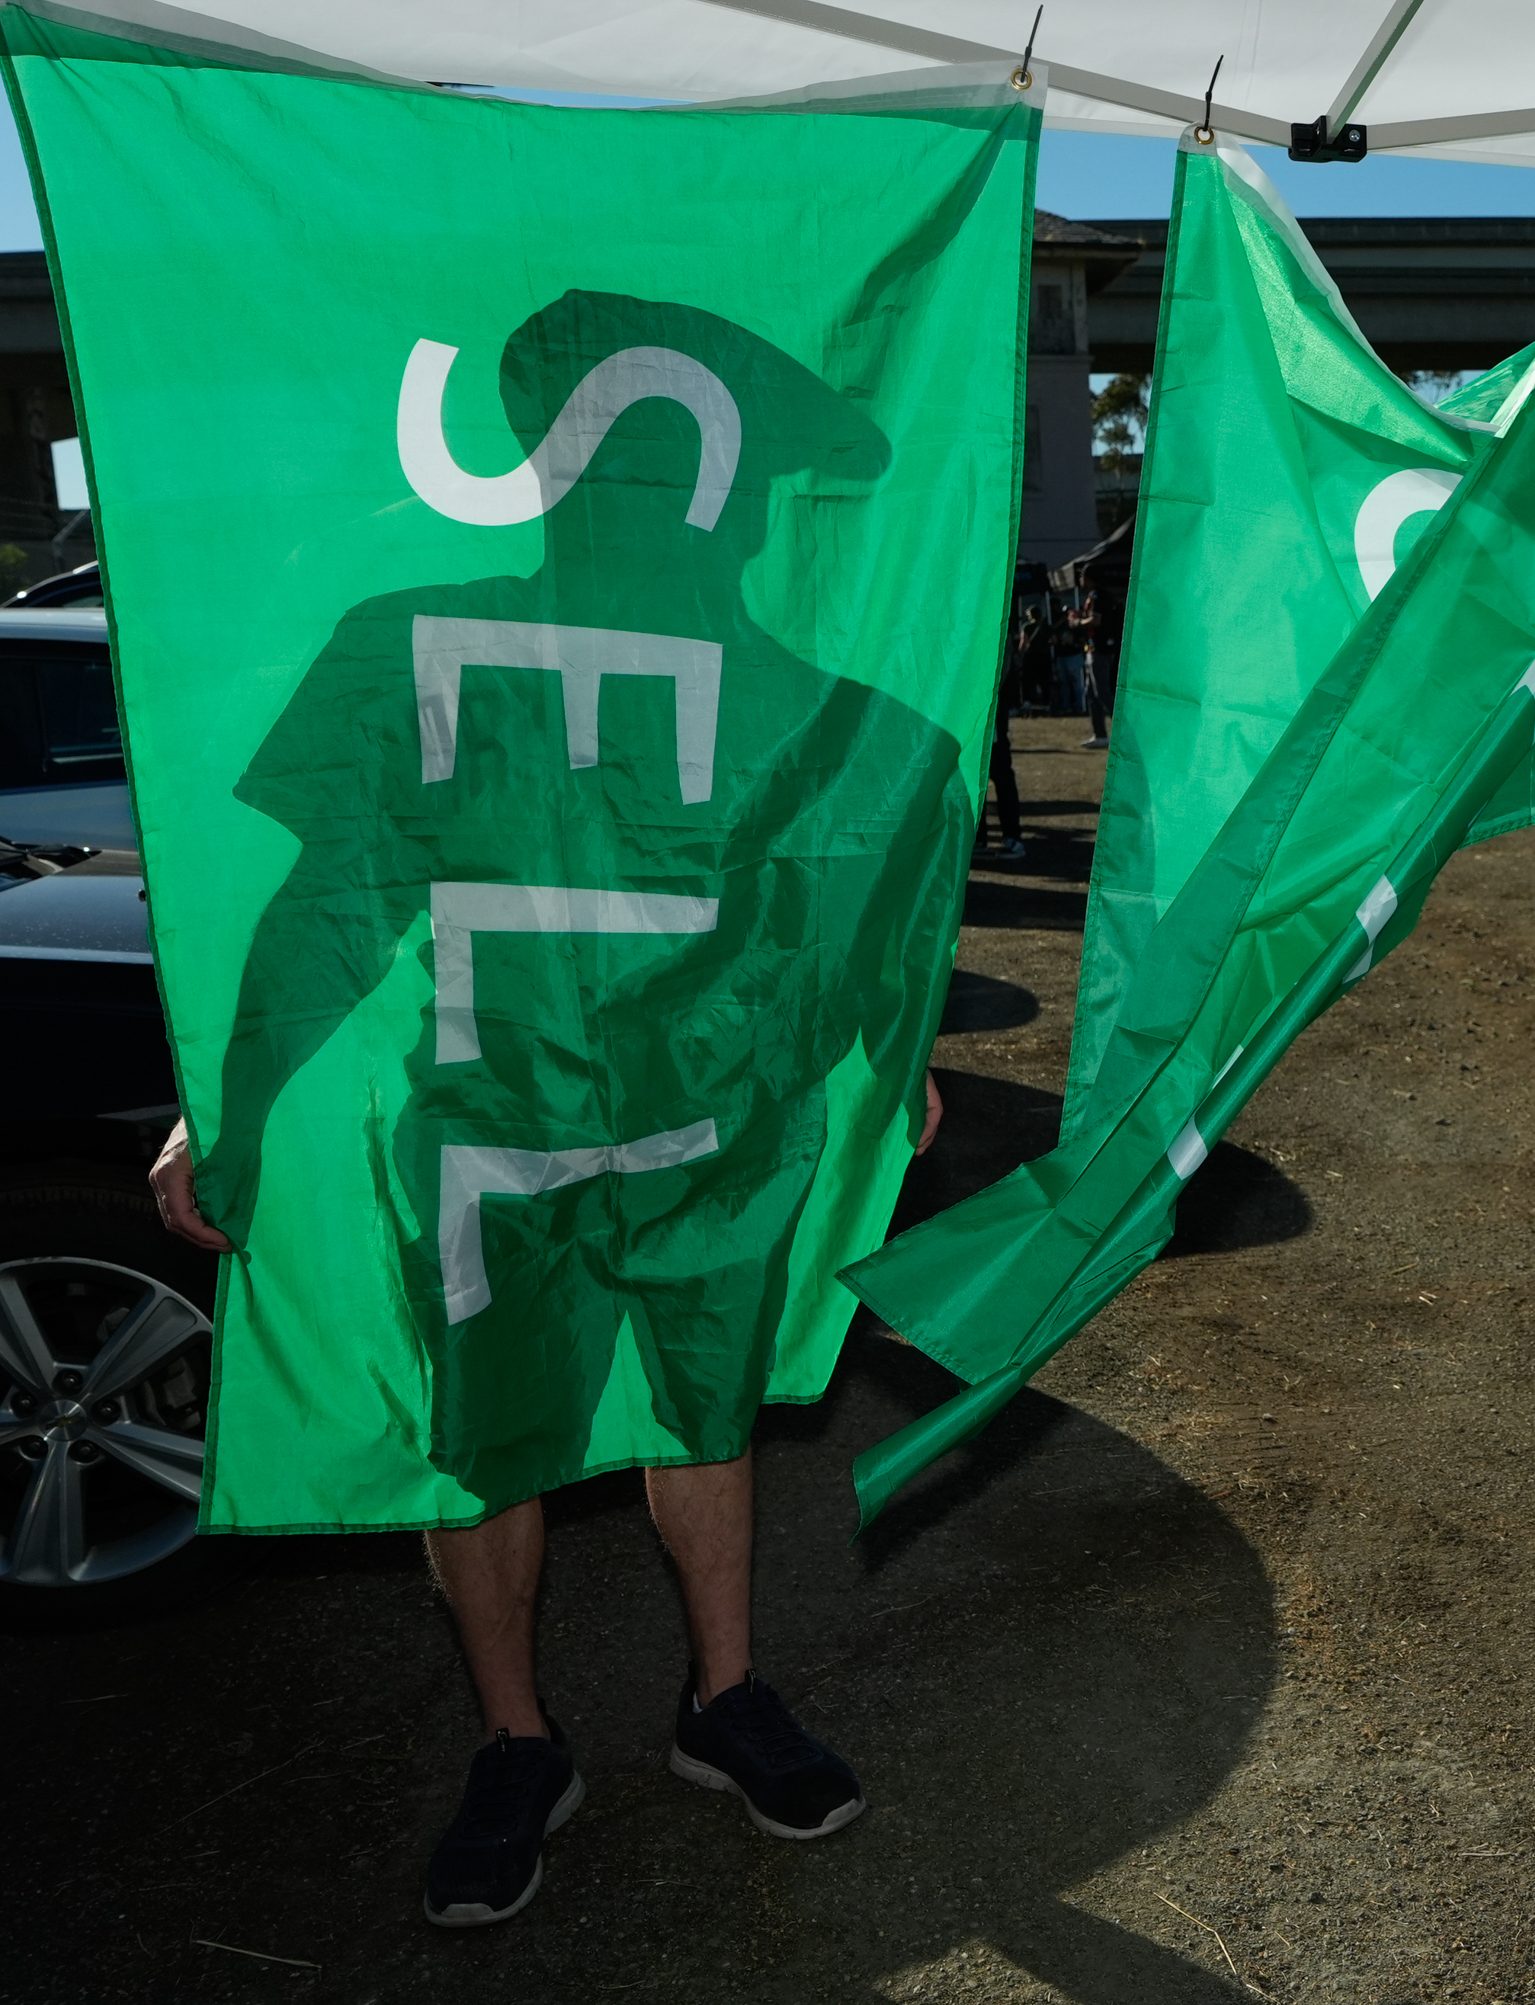 A person stands behind a green flag that reads &quot;SELL,&quot; casting a shadow. Only their legs and shoes are visible from beneath the flag.